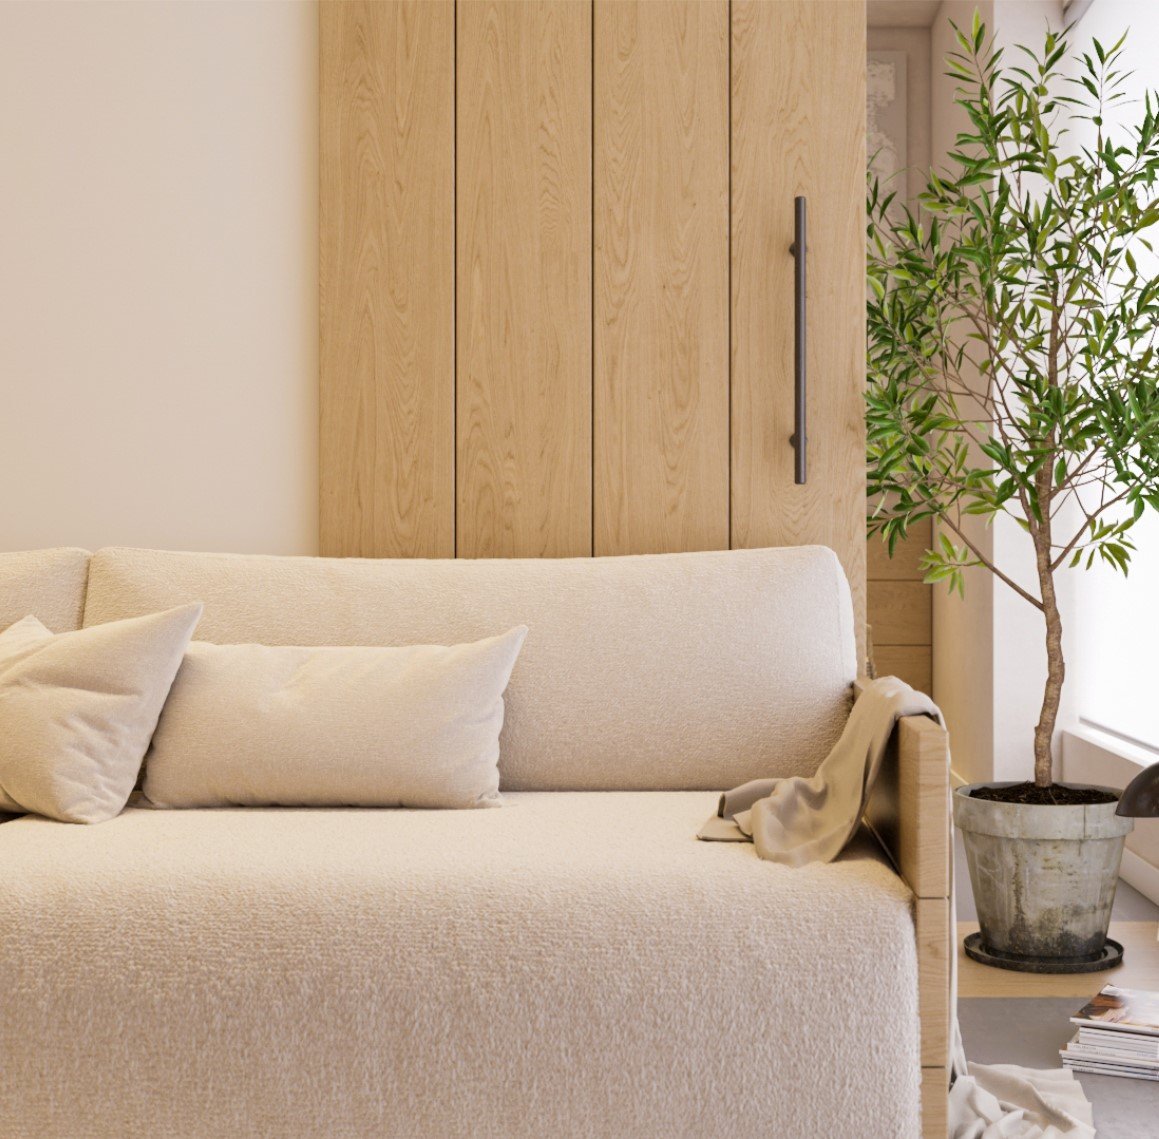 Home renovation details showcasing a plush beige sofa with soft cushions, wooden wardrobe doors, and a potted indoor tree enhancing the living space